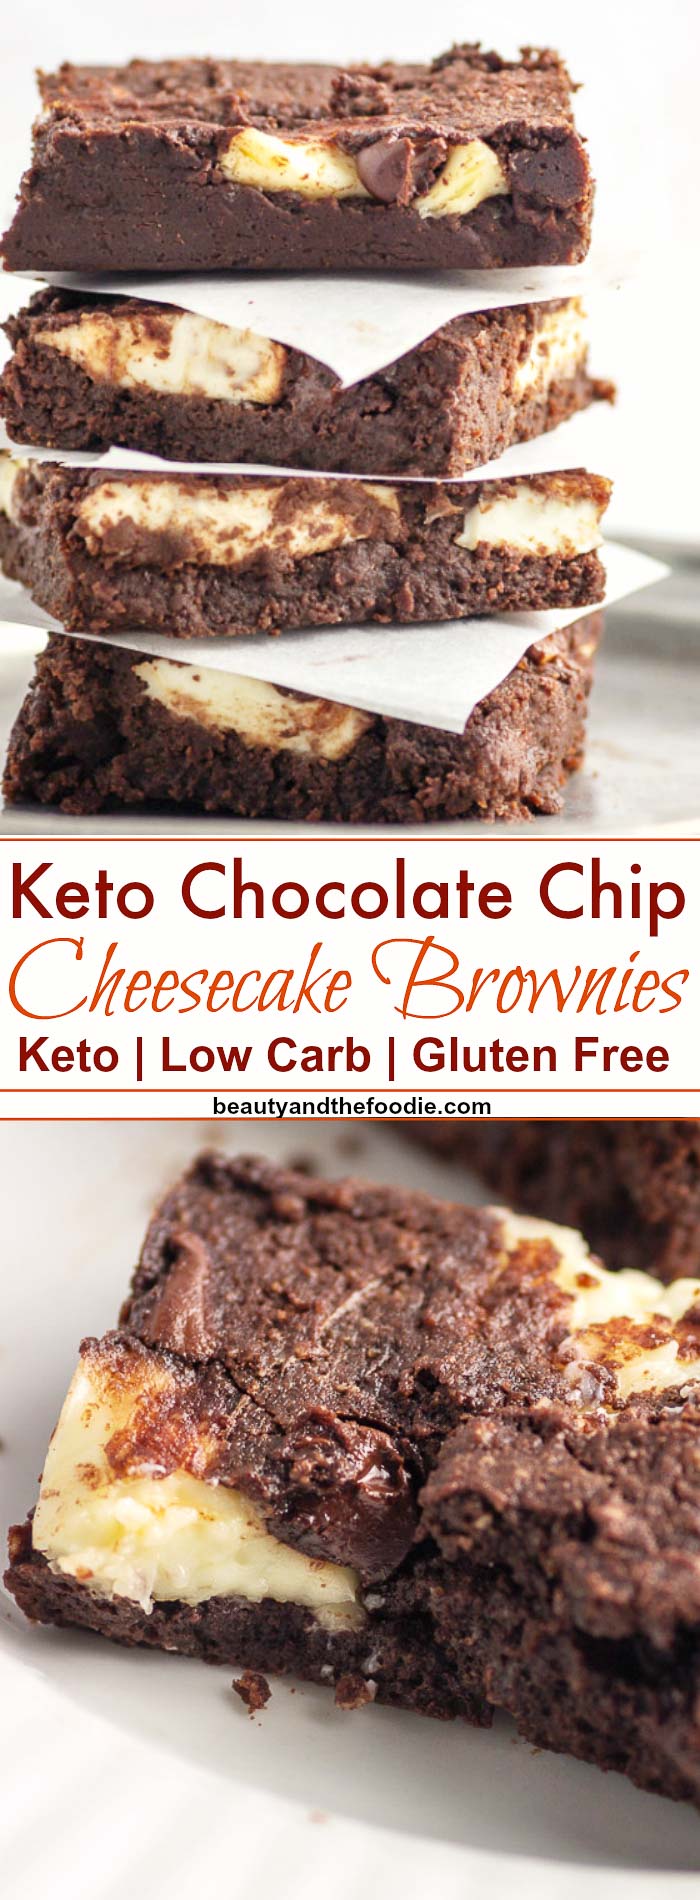 Keto Chocolate Chip Cheesecake Brownies - Low Carb & Gluten-Free